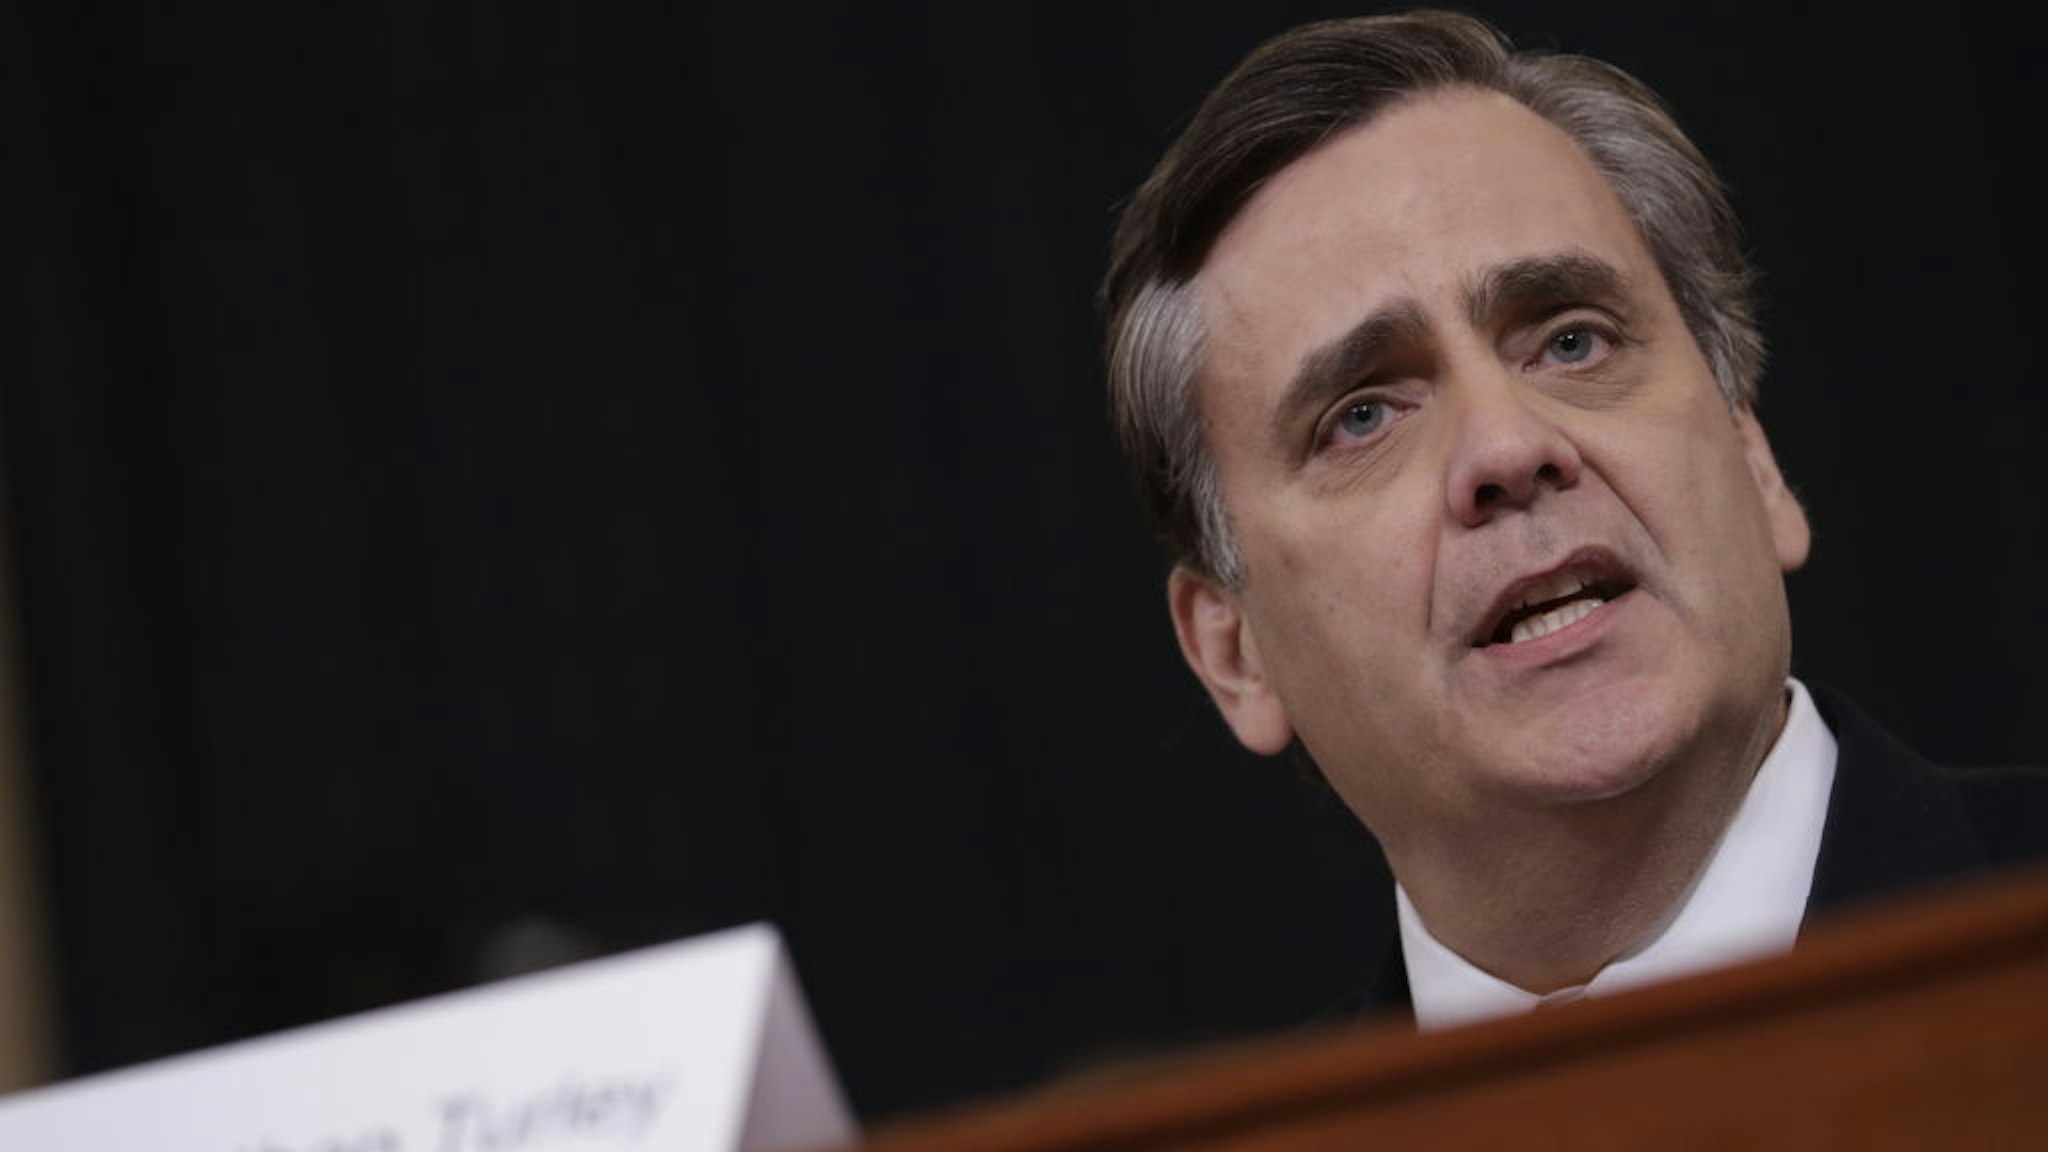 Jonathan Turley, J.B. and Maurice C. Shapiro professor of public interest law at the George Washington University Law School, delivers an opening statement during a House Judiciary Committee impeachment inquiry hearing in Washington, D.C., U.S., on Wednesday, Dec. 4, 2019. The impeachment of President Donald Trump moves to one of the most polarized committees in Congress where Republicans known for their combativeness will pose a test of the judiciary chairman's ability to keep the proceedings under control. Photographer: Andrew Harrer/Bloomberg